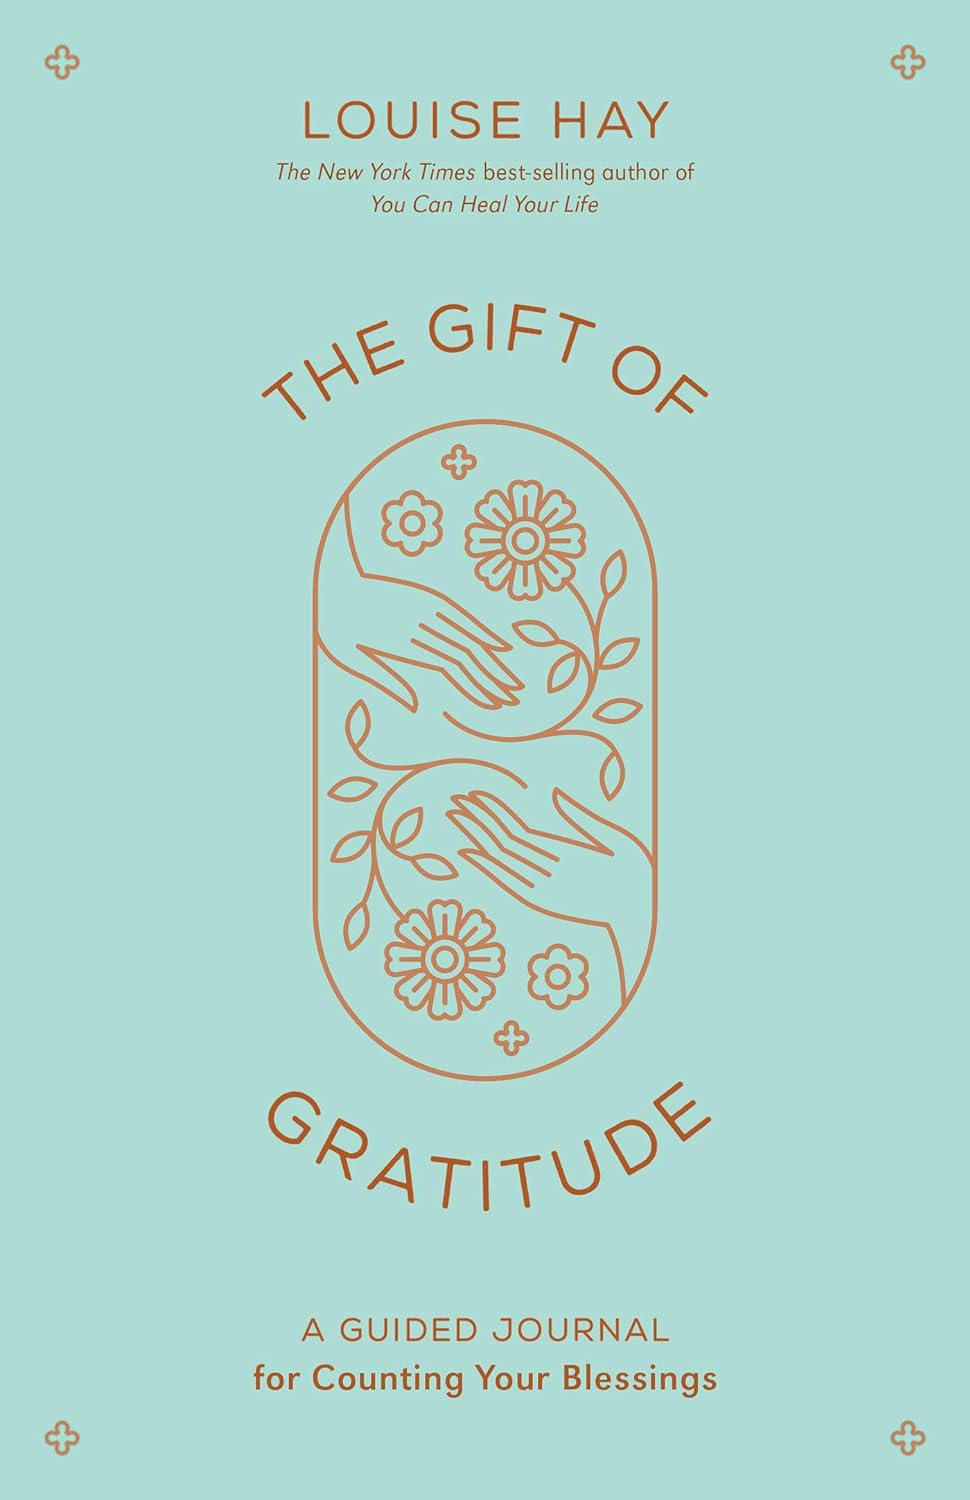 The Gift of Gratitude: A Guided Journal for Counting Your Blessings - SureShot Books Publishing LLC